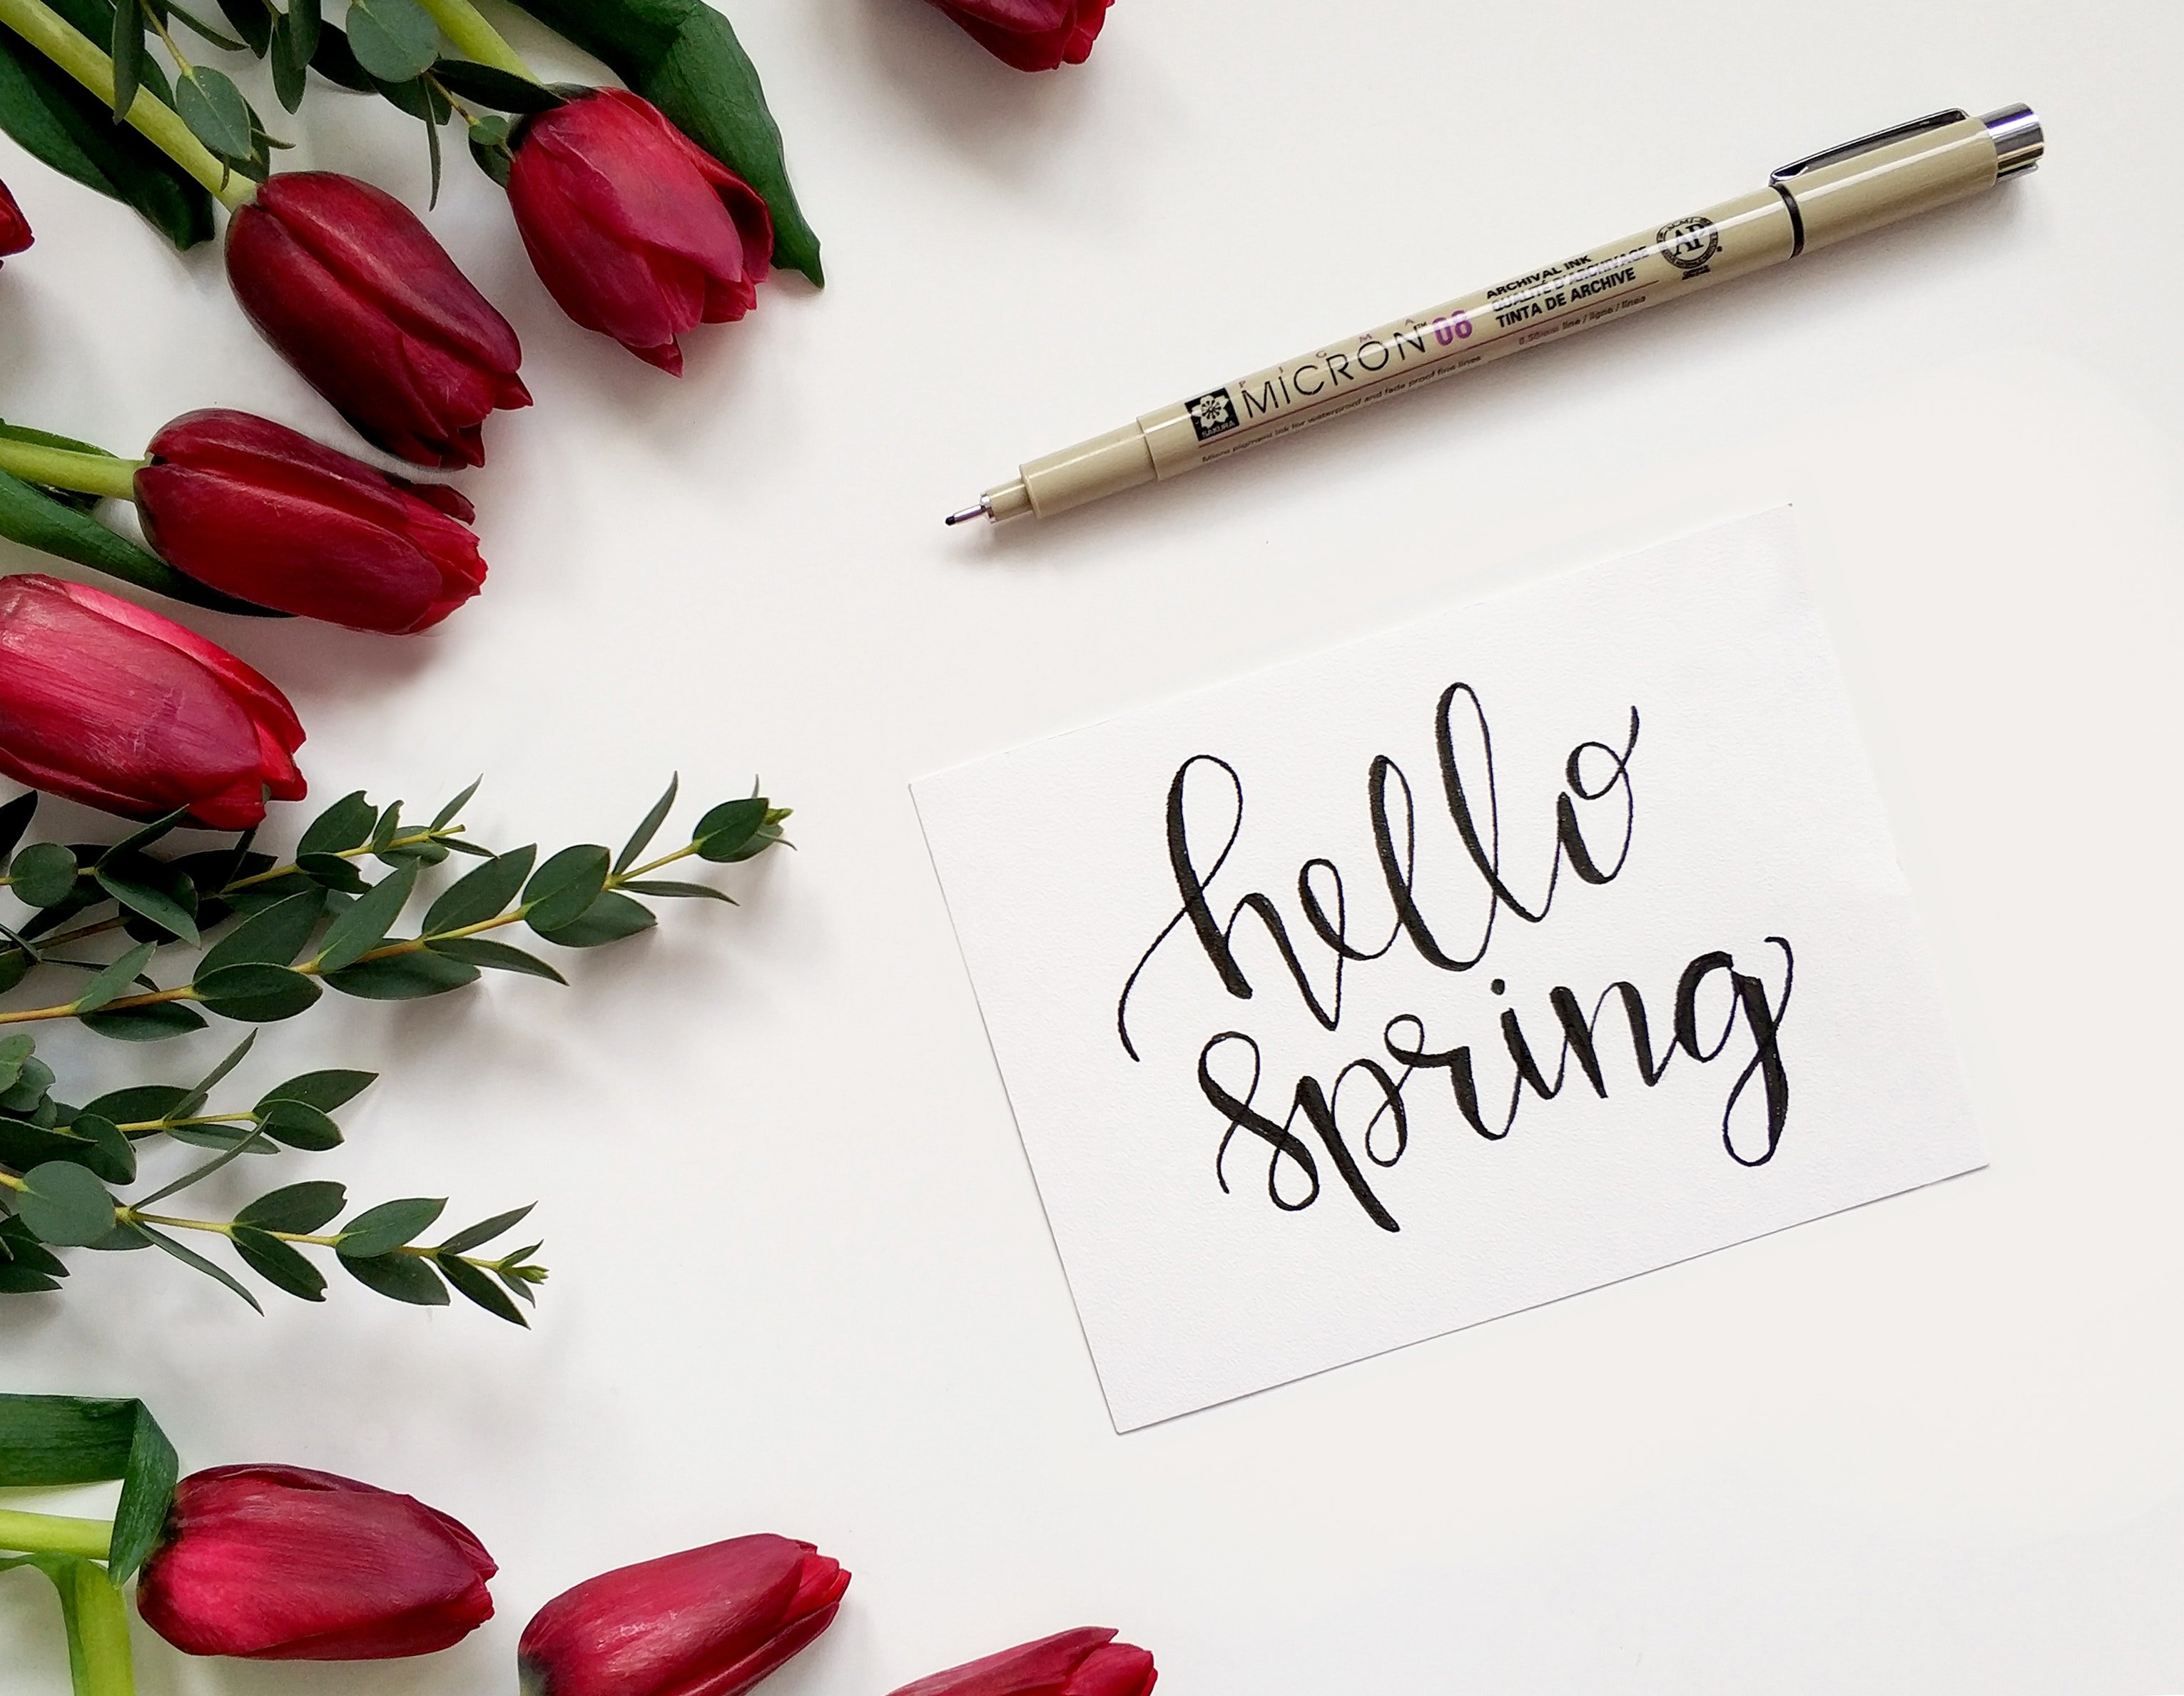 Welcome Spring. | Source: Pexels